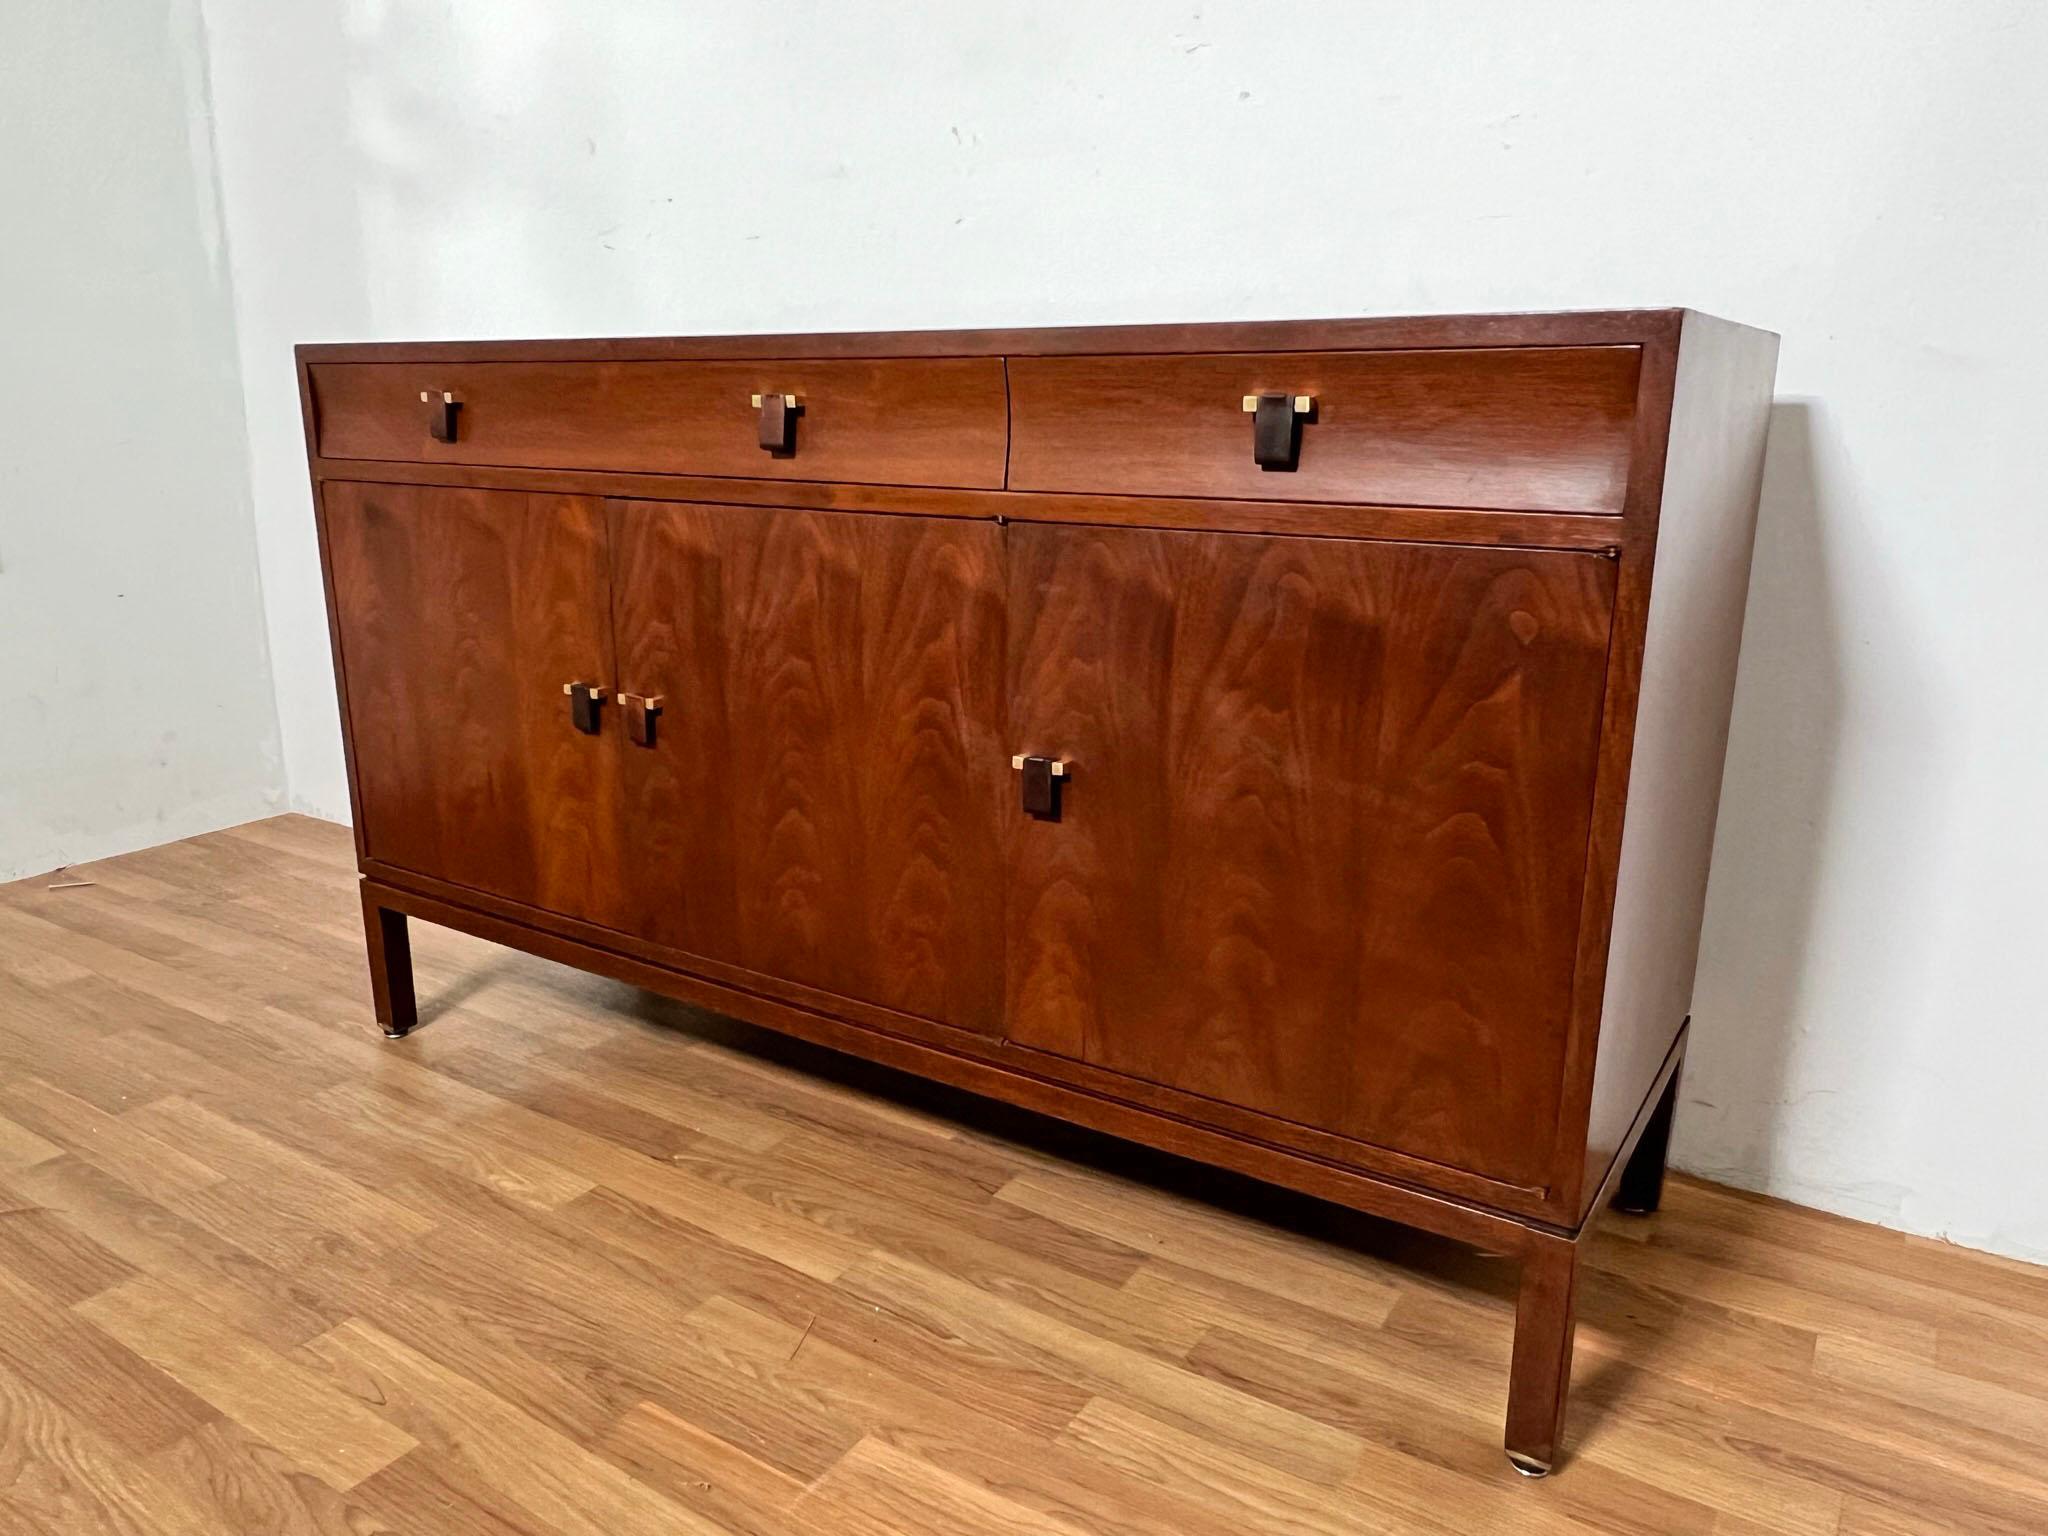 A three door mahogany credenza with rosewood and brass drawer pulls, and three drawers above, designed by Edward Wormley for Dunbar, circa 1950s.